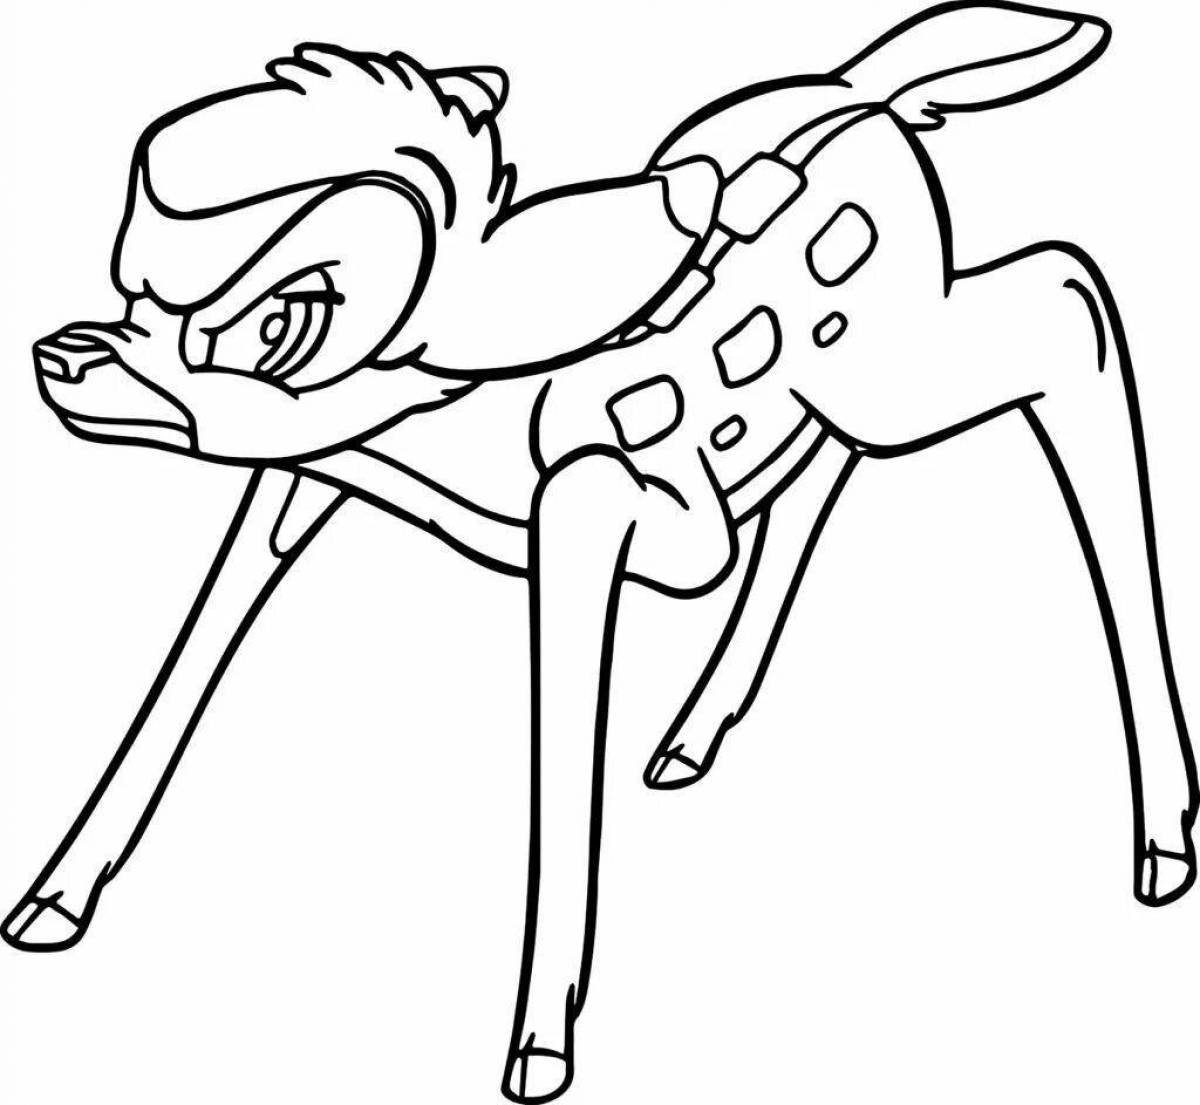 Cute bambi fawn coloring page